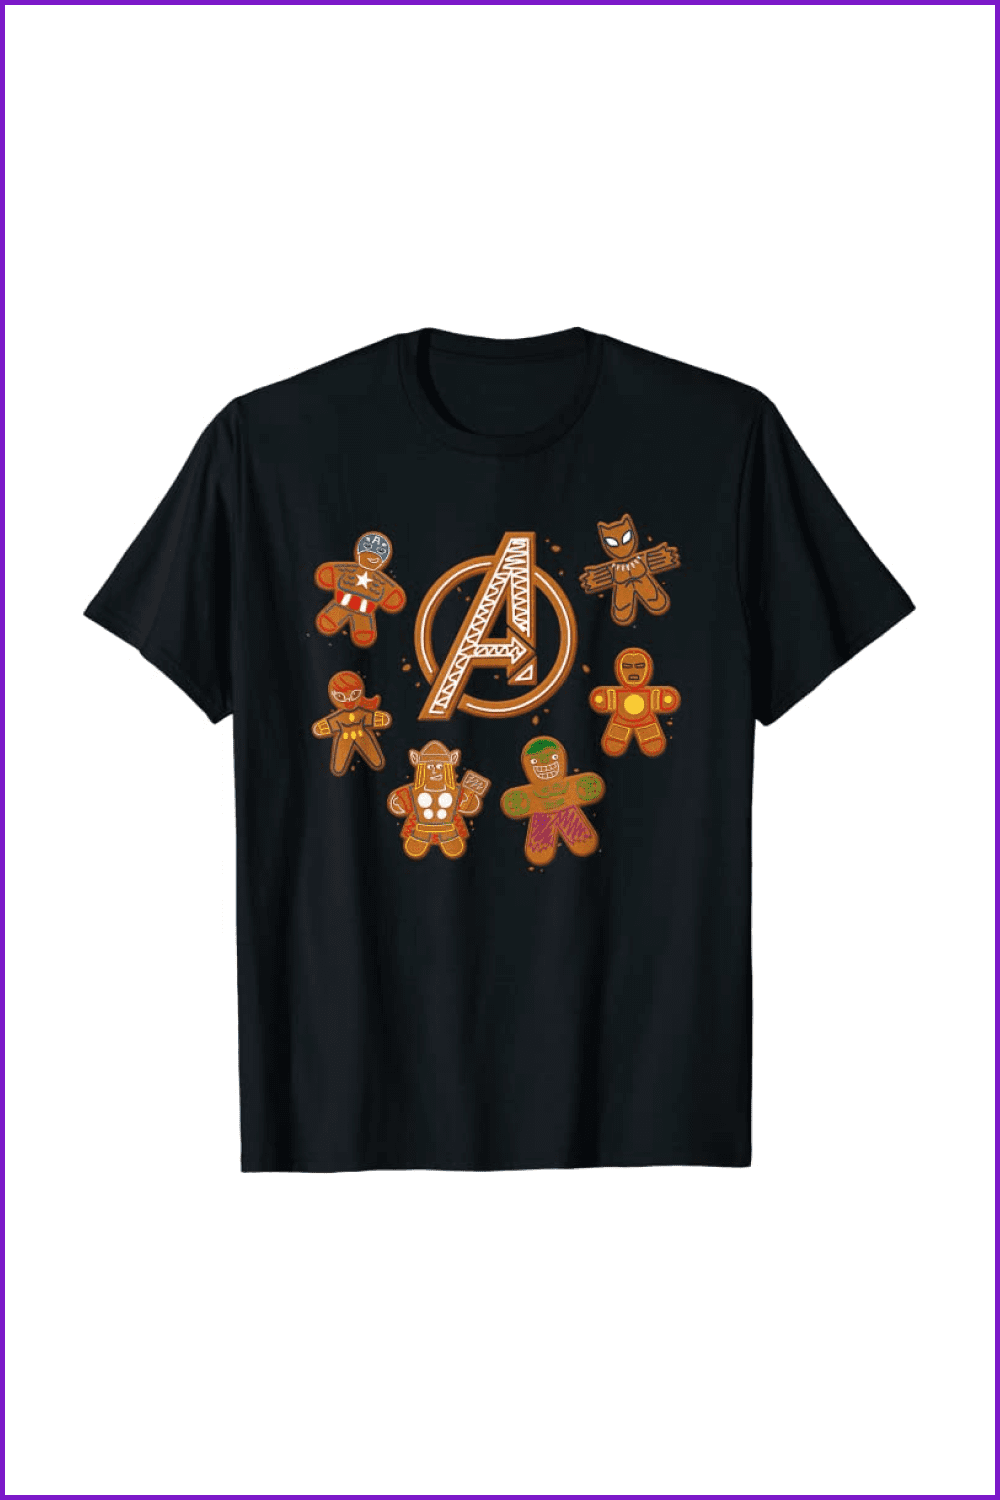 Black t-shirt with six avengers and the big letter 